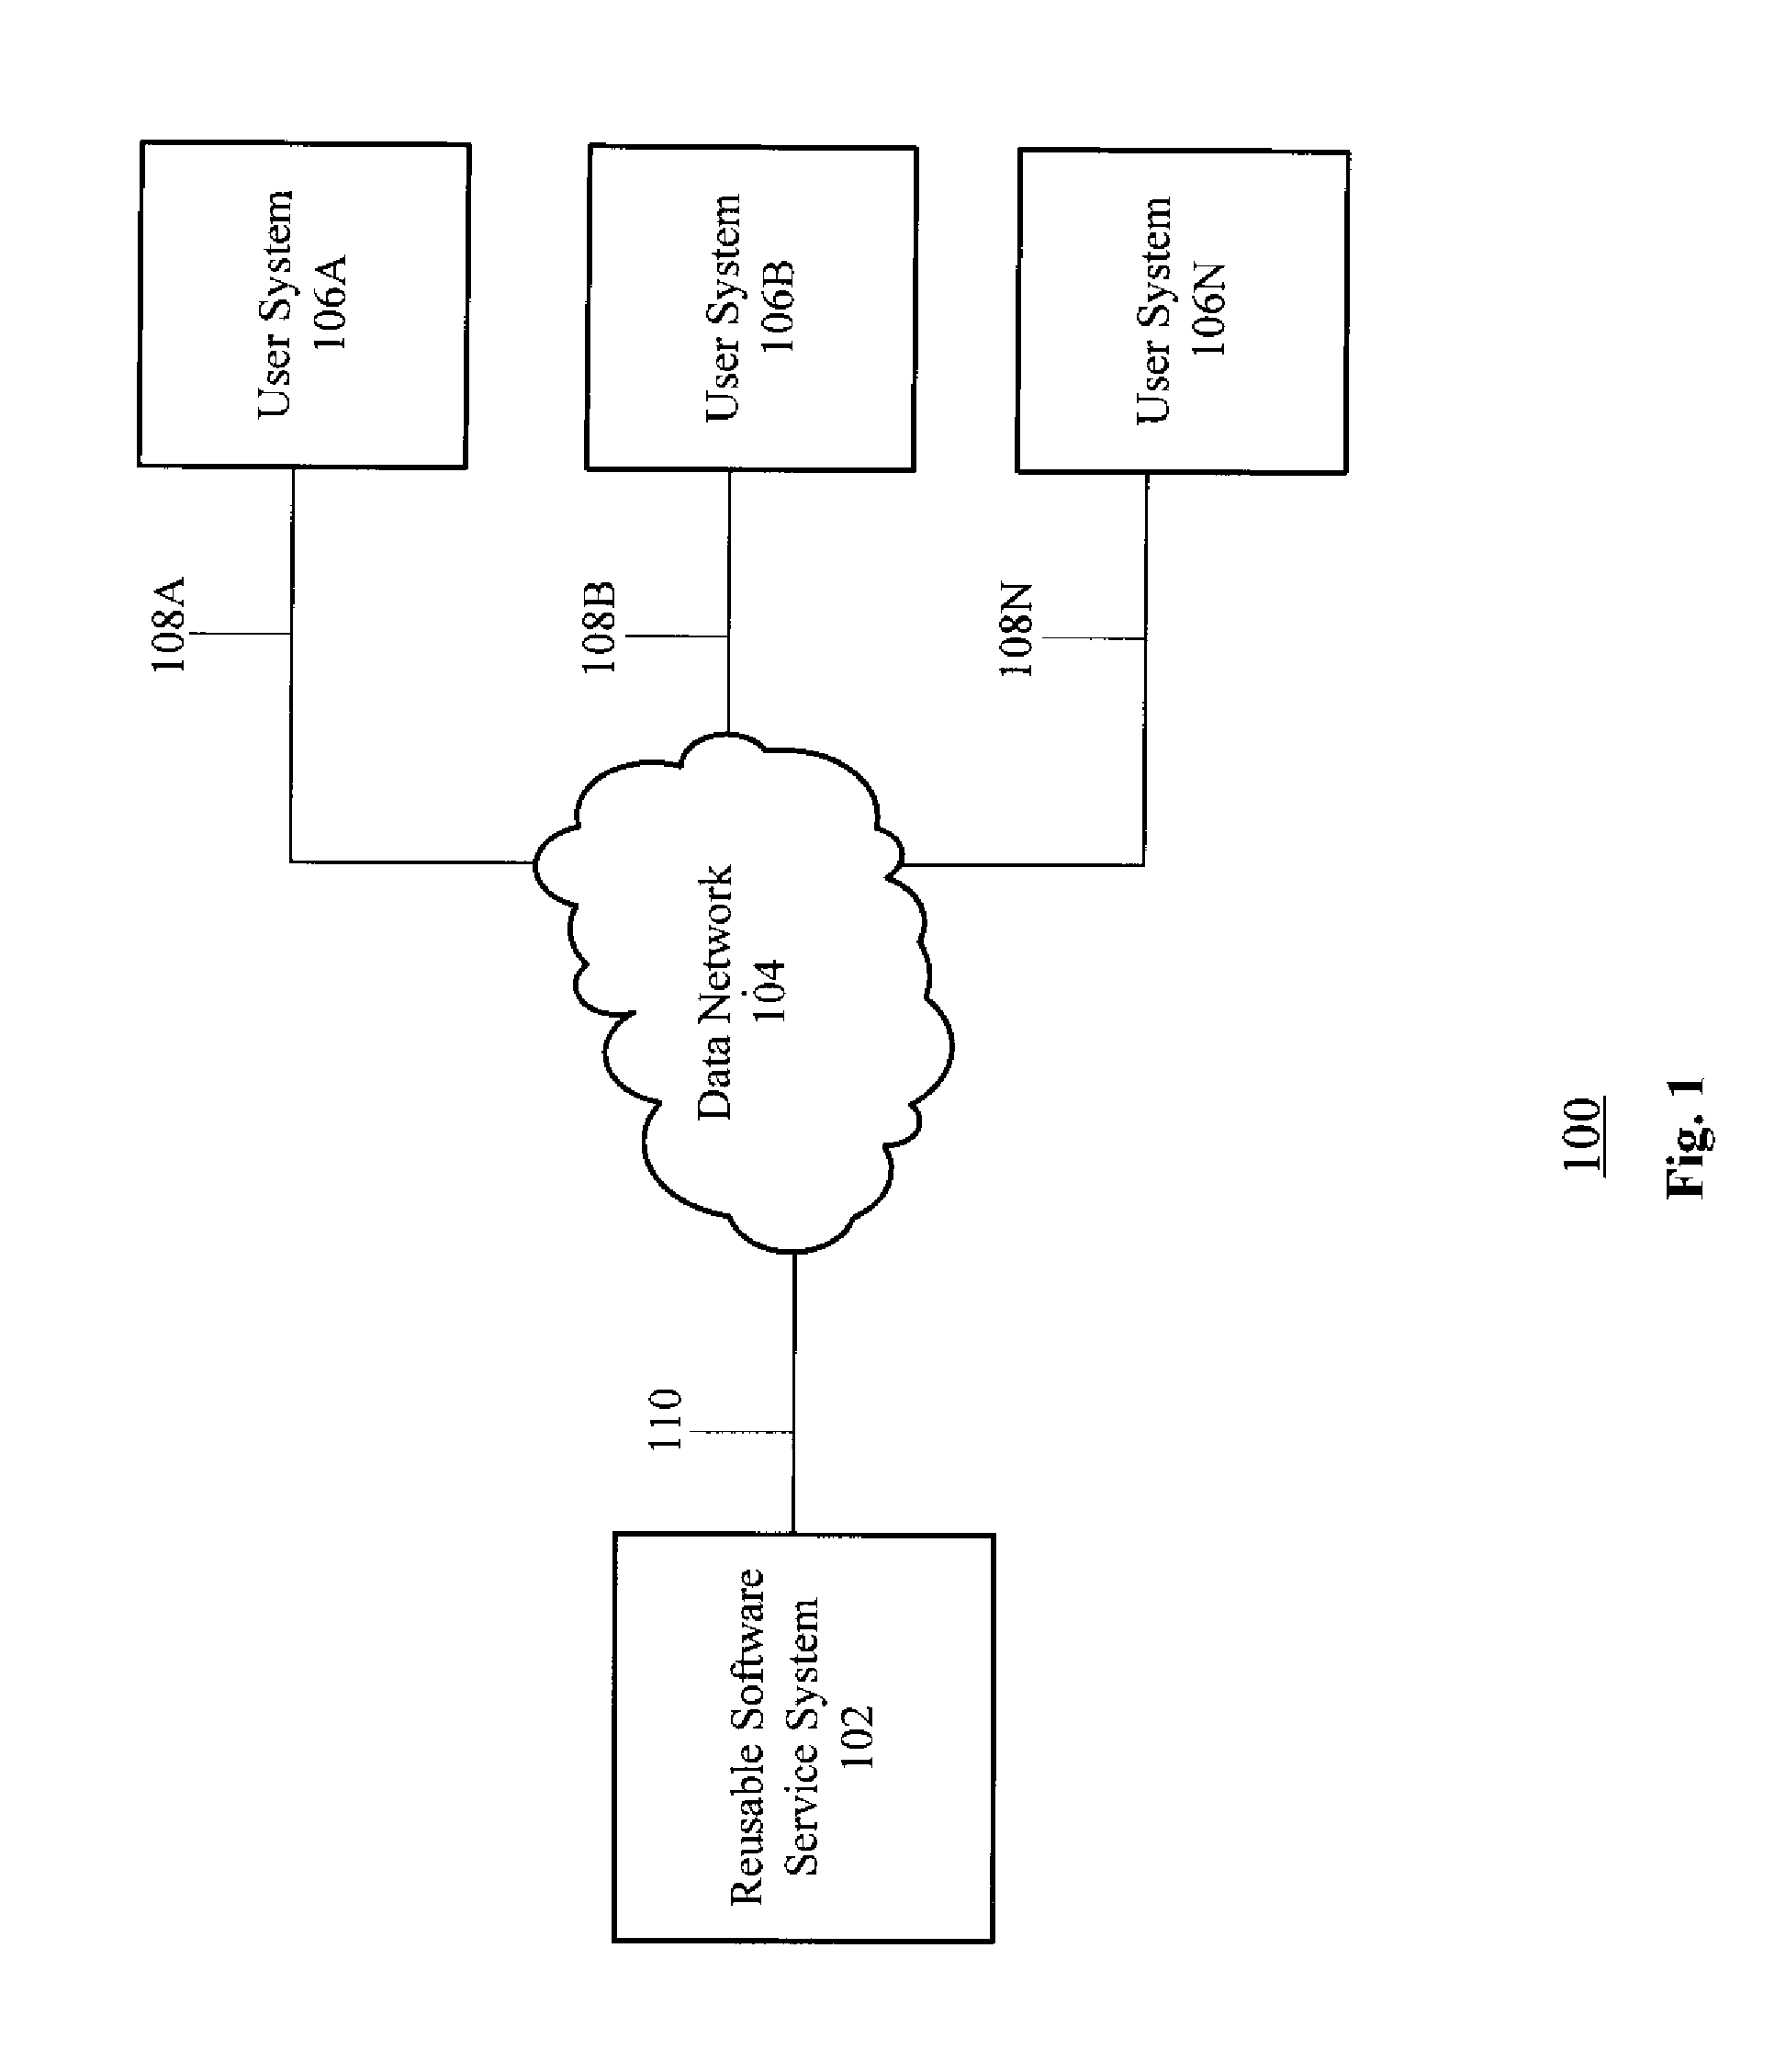 System for and method of providing reusable software service information based on natural language queries